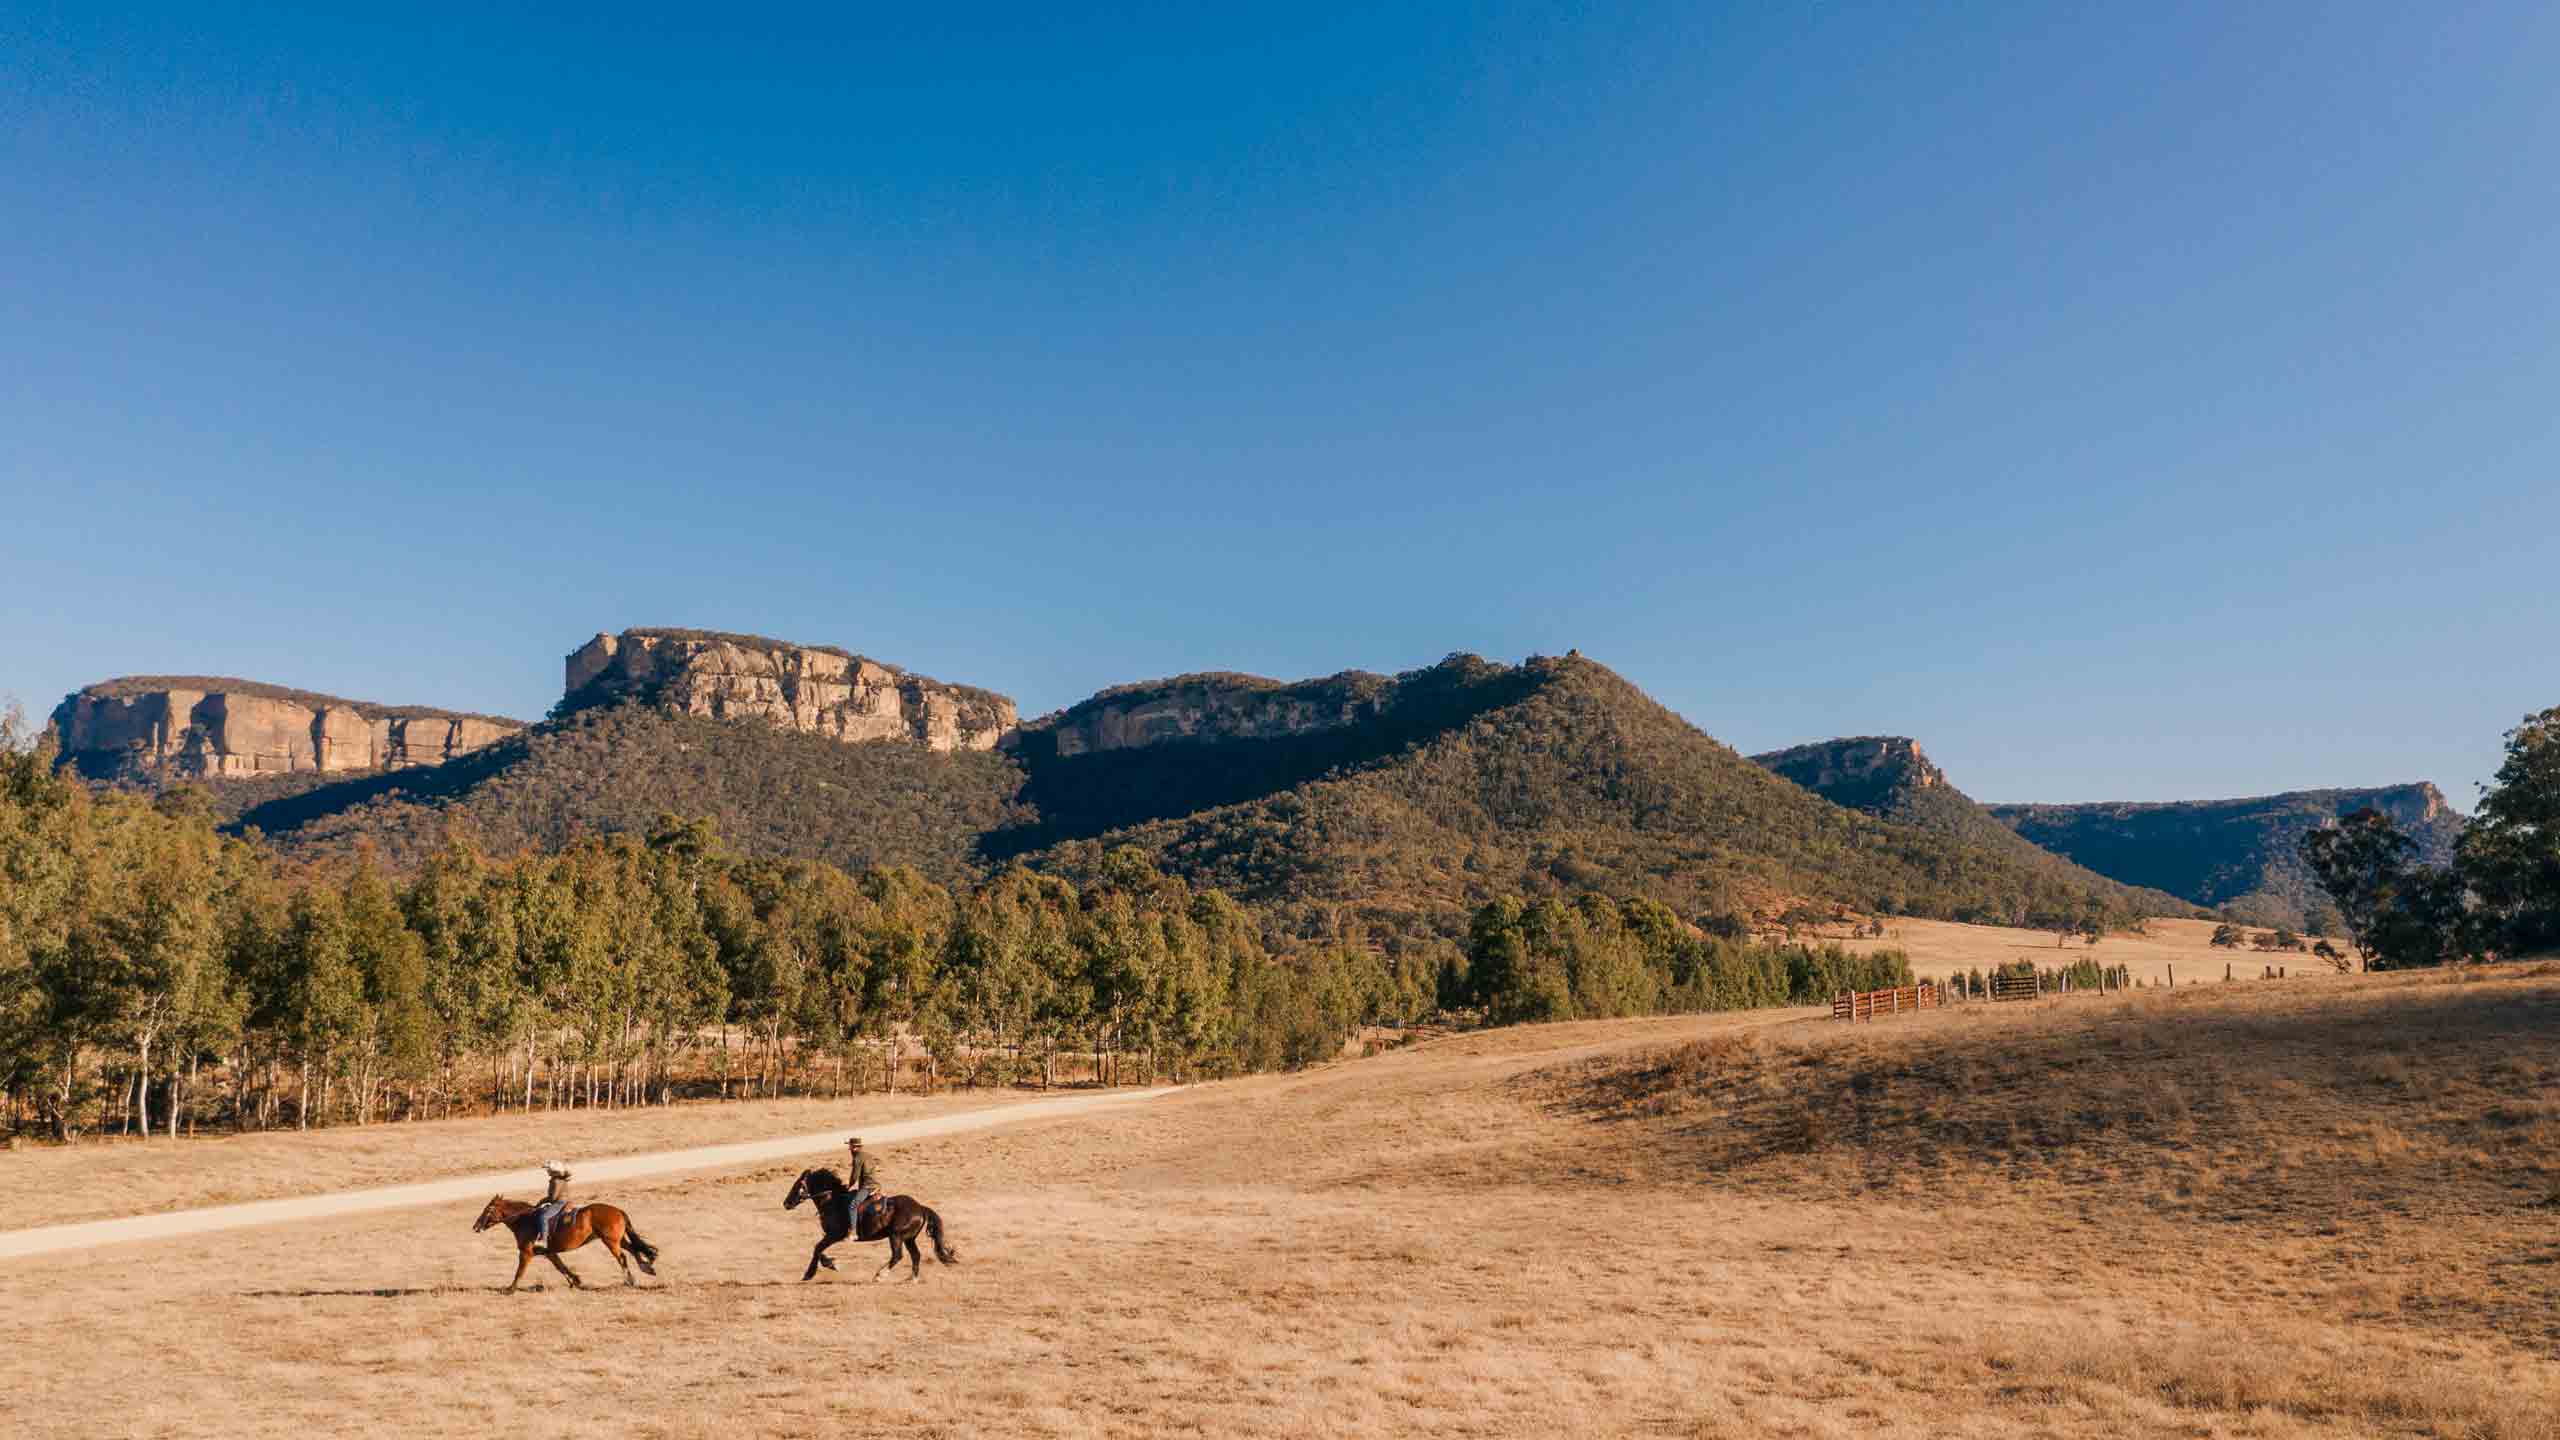 OneAndOnly-WolganValley-bluemountains-australia-galloping-horseriding